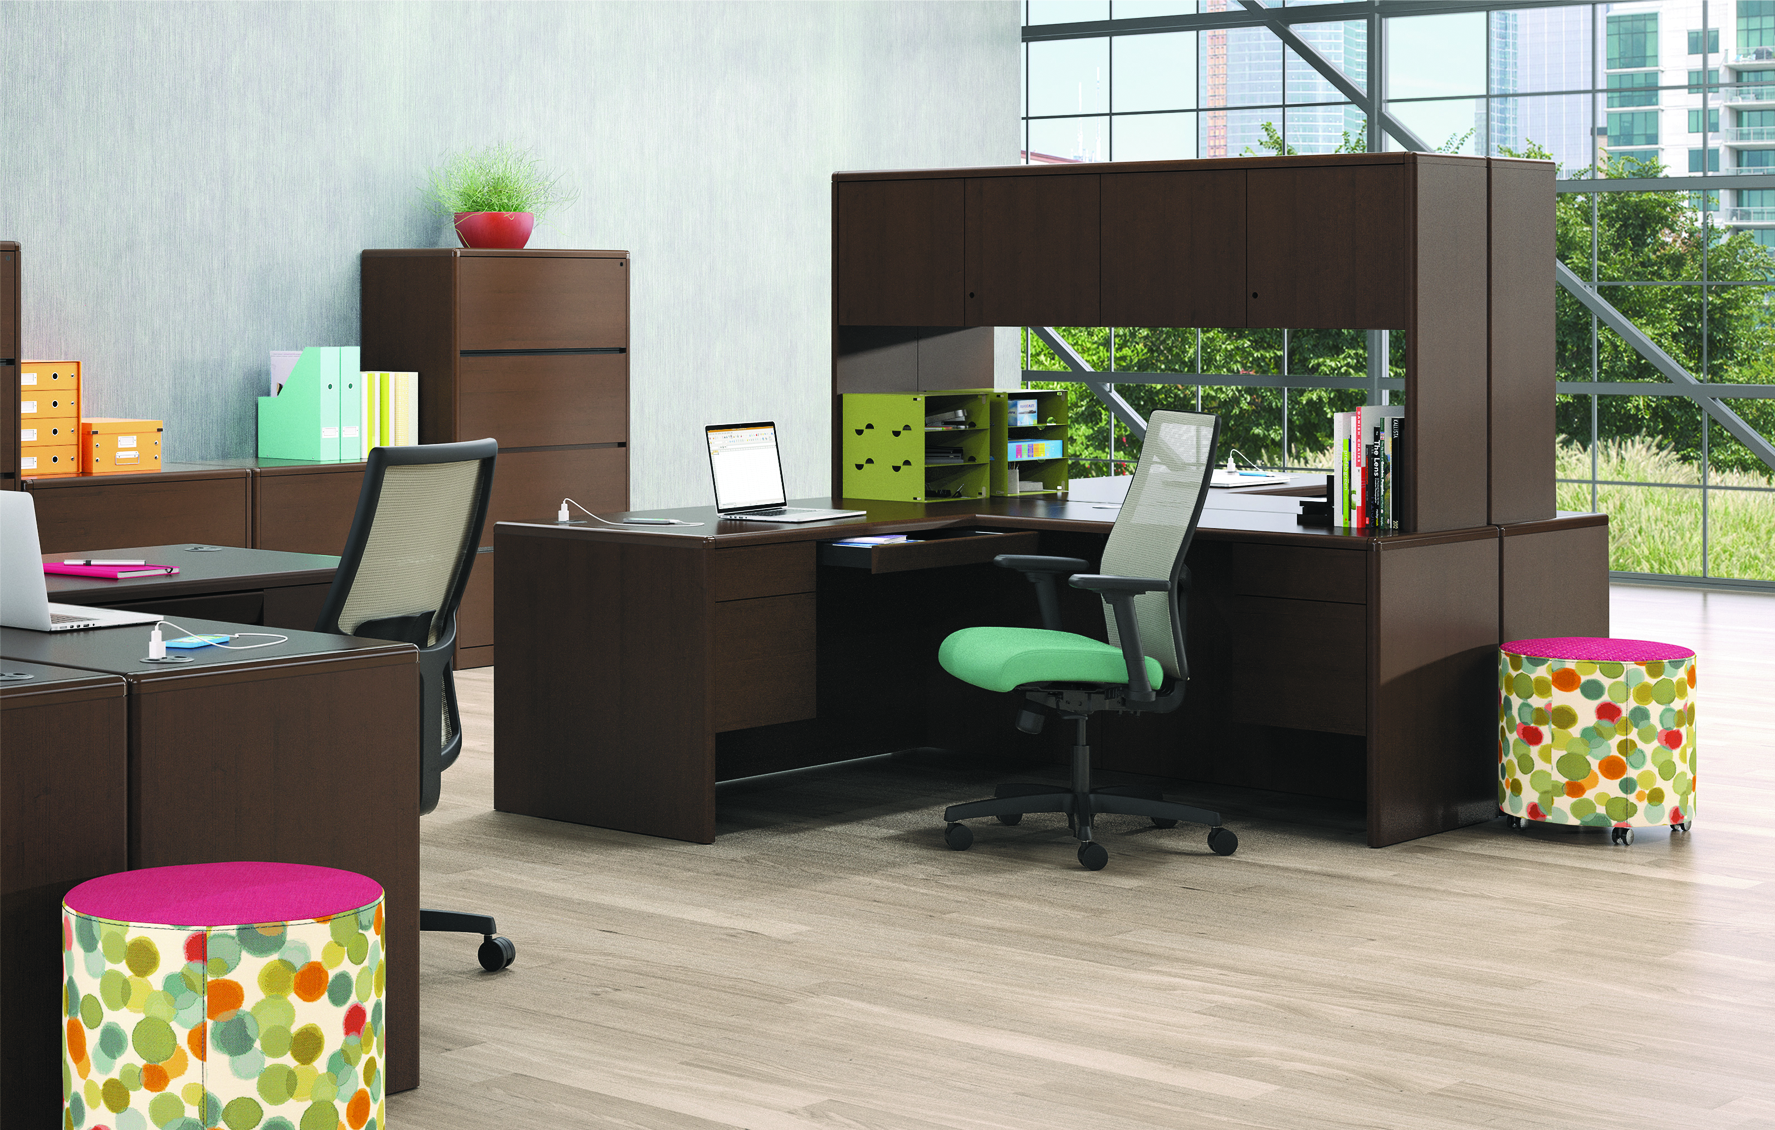 office products inc